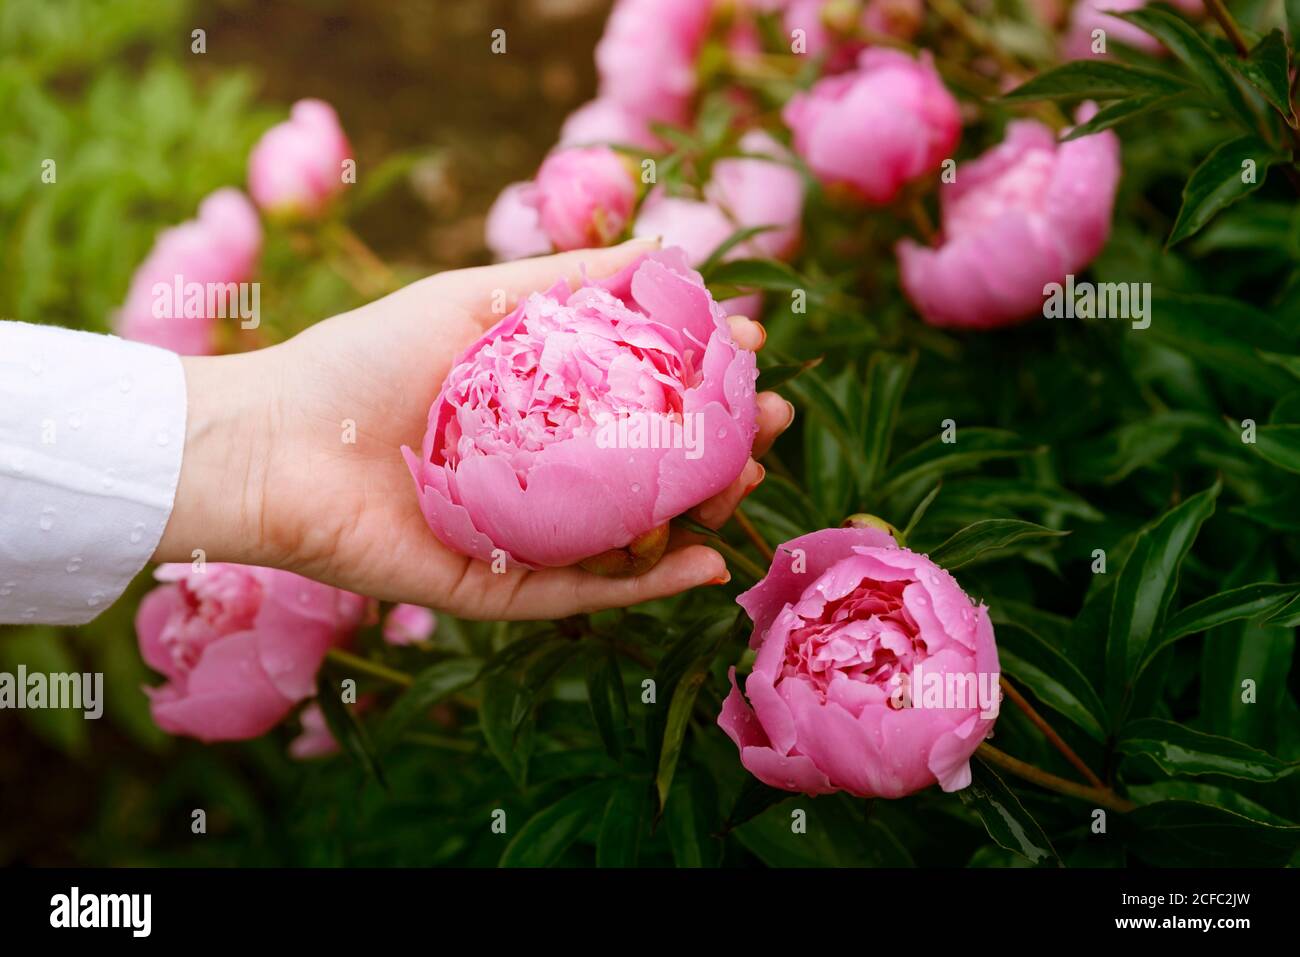 Woman picking pink peony flowers in garden on sunny day. Blooming peonies bush with buds and pastel pink petals. Concept of beauty, care, fresh flower Stock Photo